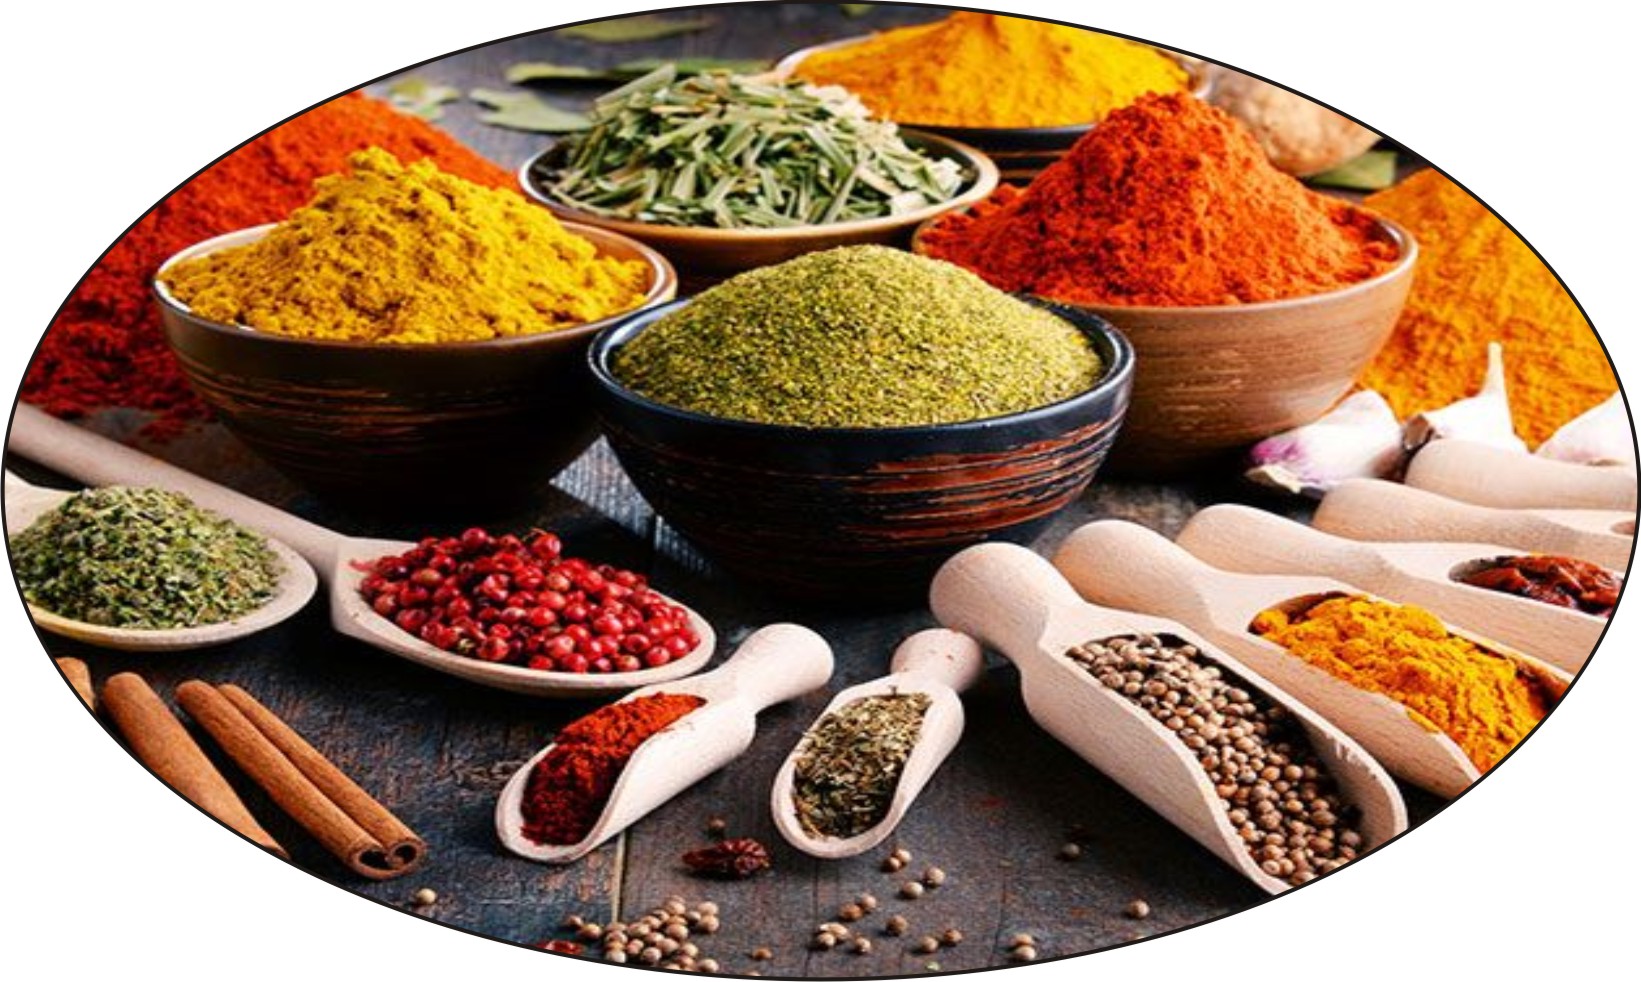 Spices and dry-fruits